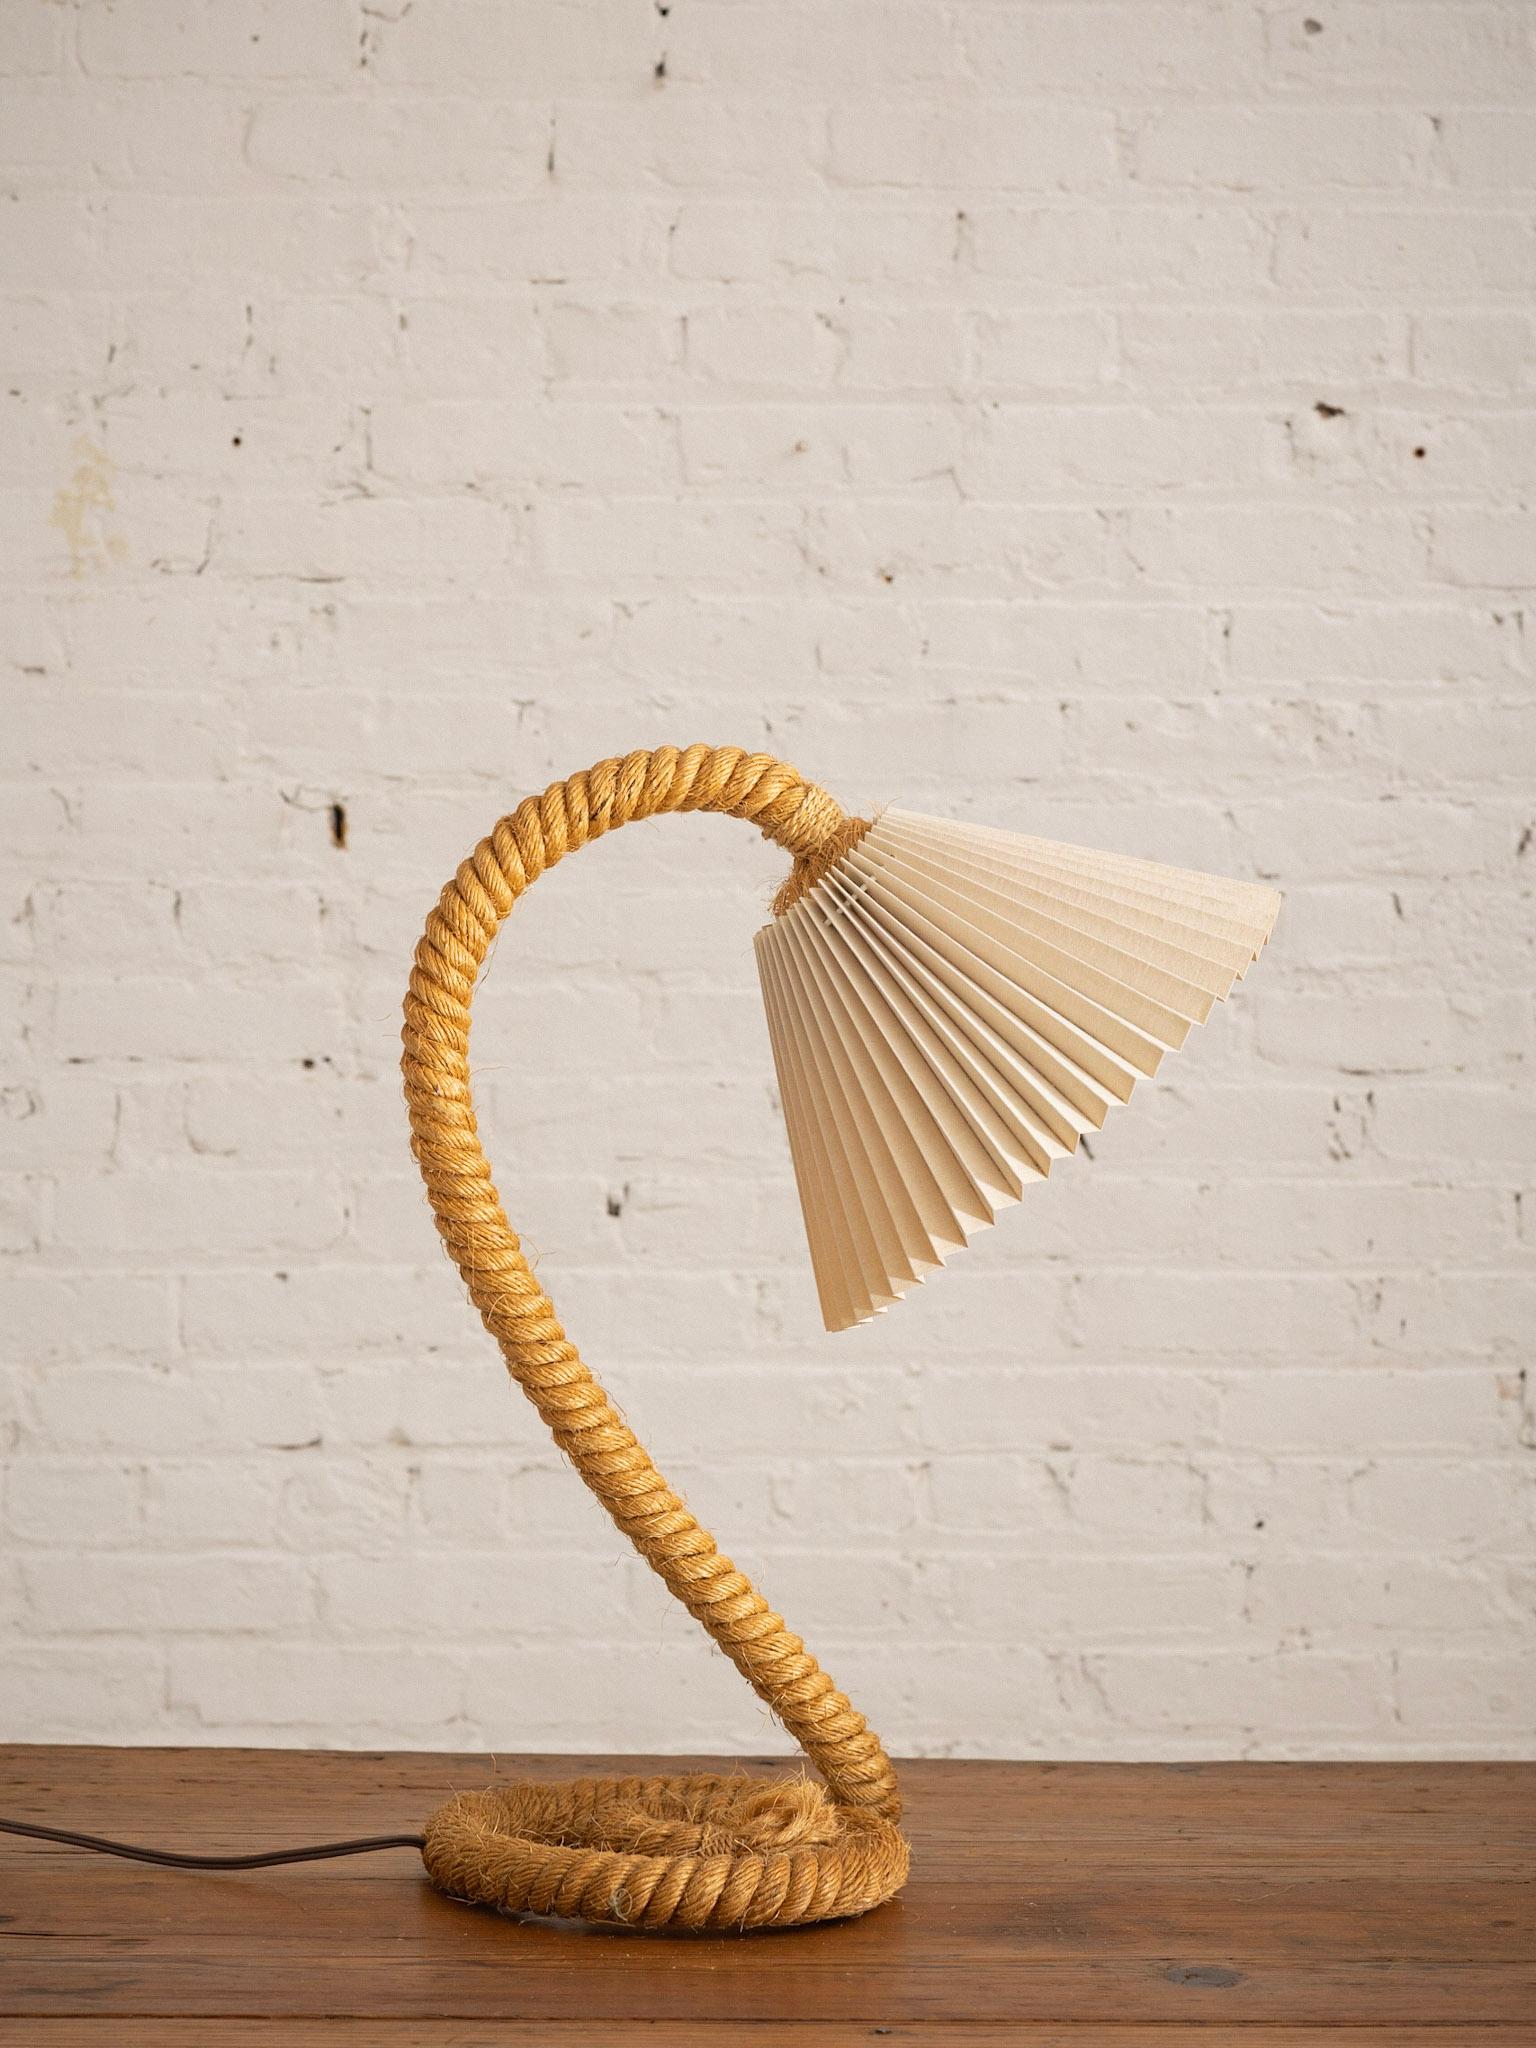 A vintage rope wrapped table lamp. In the style of Adrien Audoux and Frida Minet. Gooseneck silhouette with spiral base. Frayed rope edges are inherent to the lamp design. Lamp shade not included.